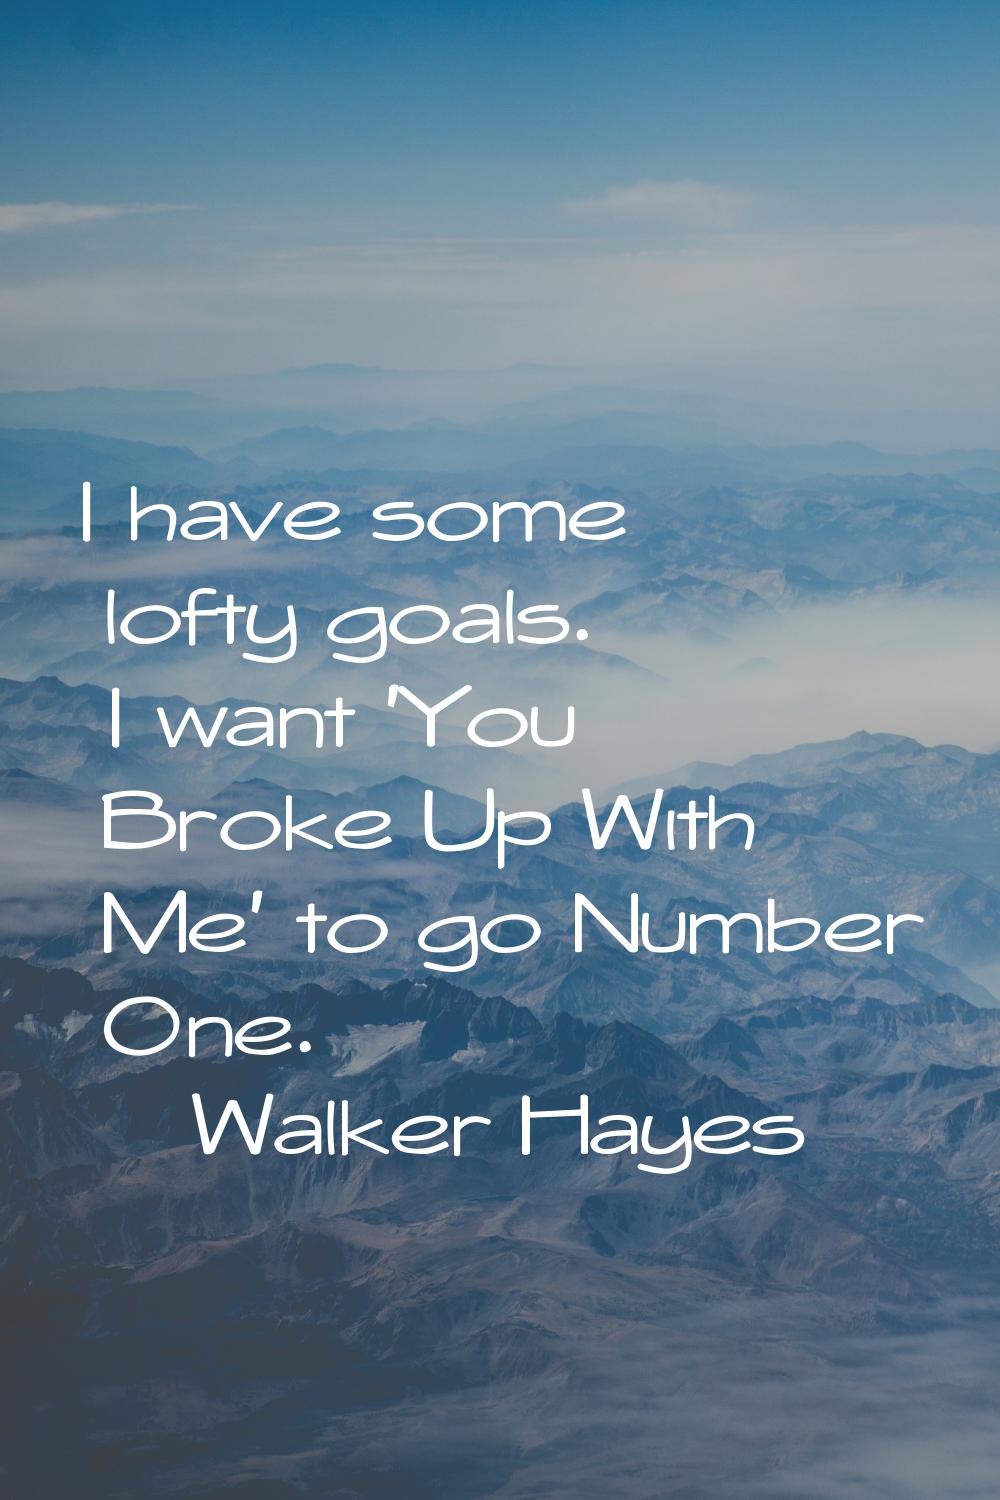 I have some lofty goals. I want 'You Broke Up With Me' to go Number One.